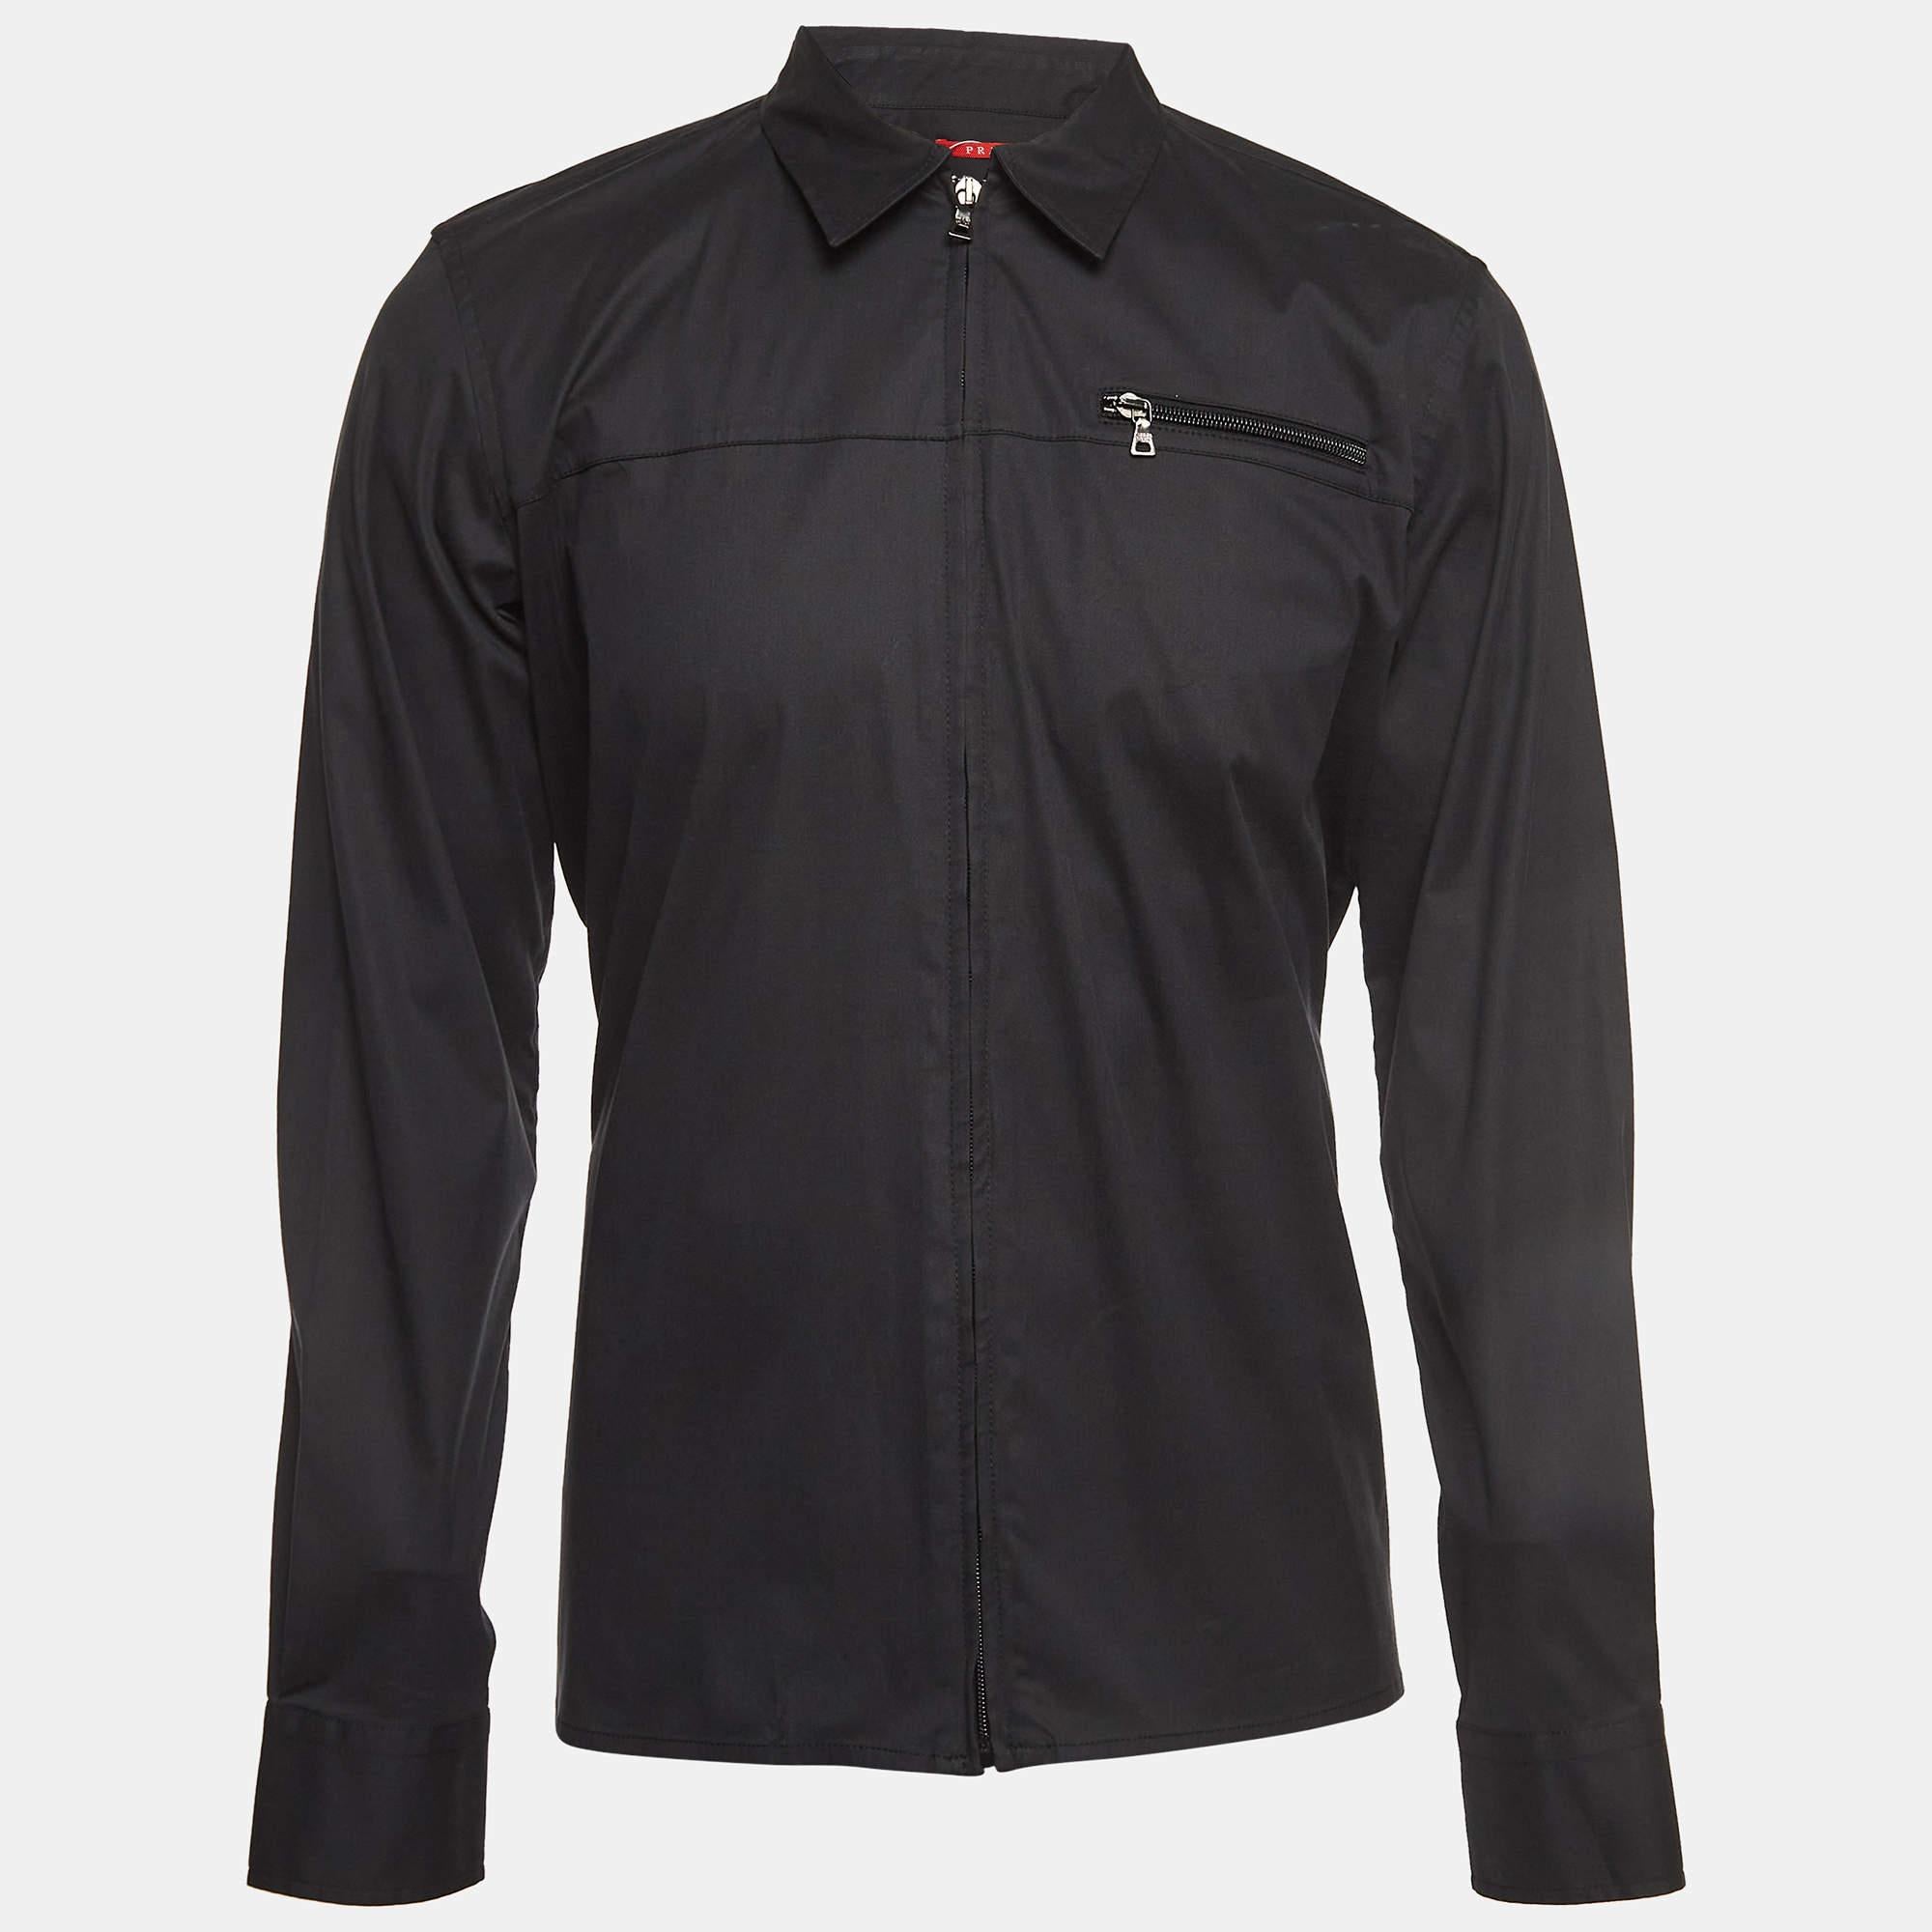 This Prada Sport black jacket offers the satisfaction of a comfortable fit and refined style. It is made of quality fabrics and designed with a front zipper, pocket, and long sleeves.

